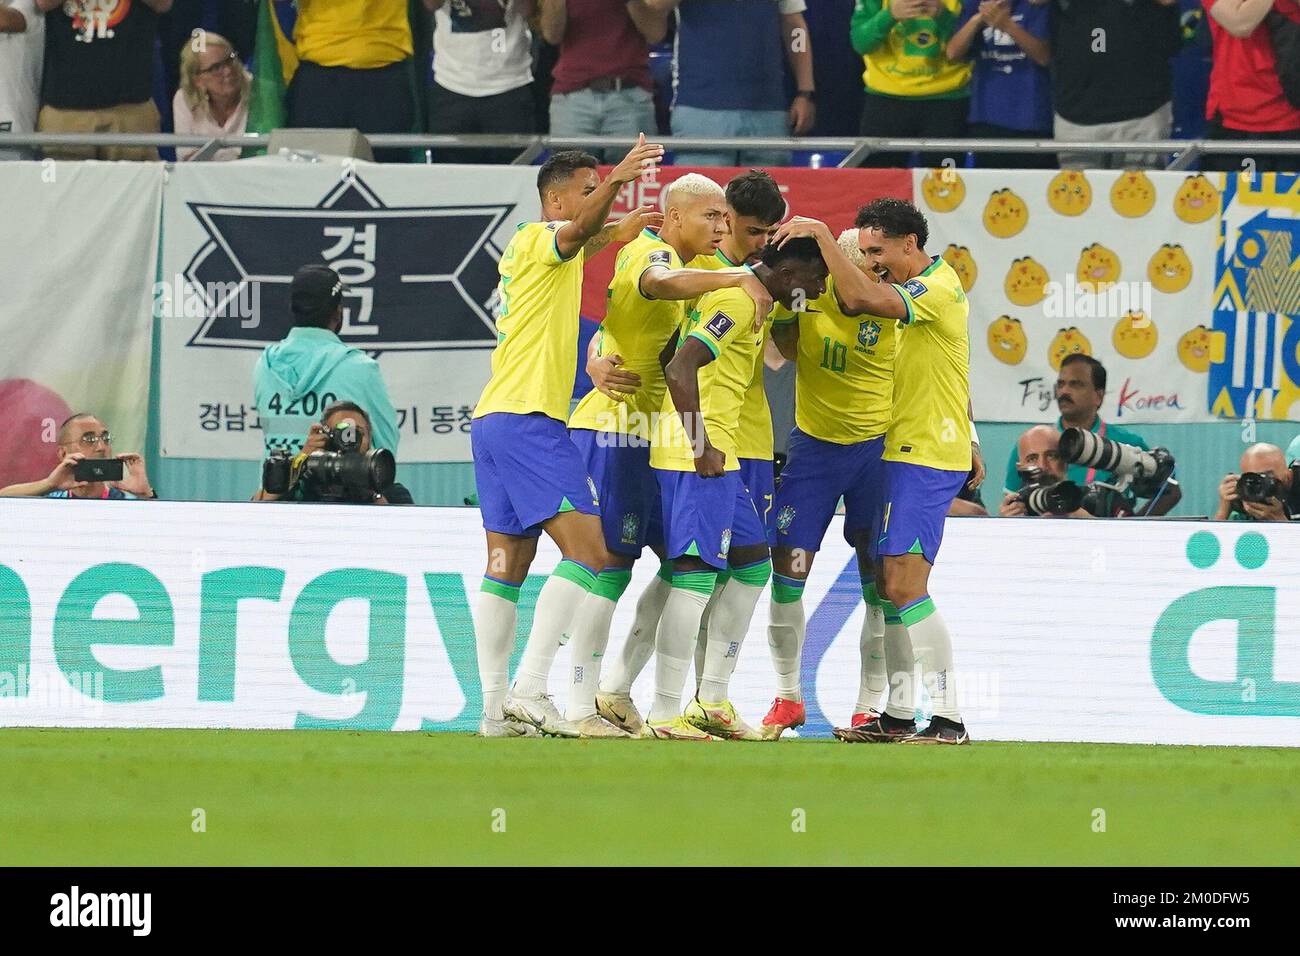 DOHA, QATAR - DECEMBER 5: Player of Brazil Vinícius Júnior celebrates with this teammates Marquinhos, Lucas Paquetá, Danilo, Richarlison and Neymar after scoring a goal fights for the ball with player of South Korea during the FIFA World Cup Qatar 2022 Round of 16 match between Brazil and South Korea at Stadium 974 on December 5, 2022 in Doha, Qatar. (Photo by Florencia Tan Jun/PxImages) Stock Photo